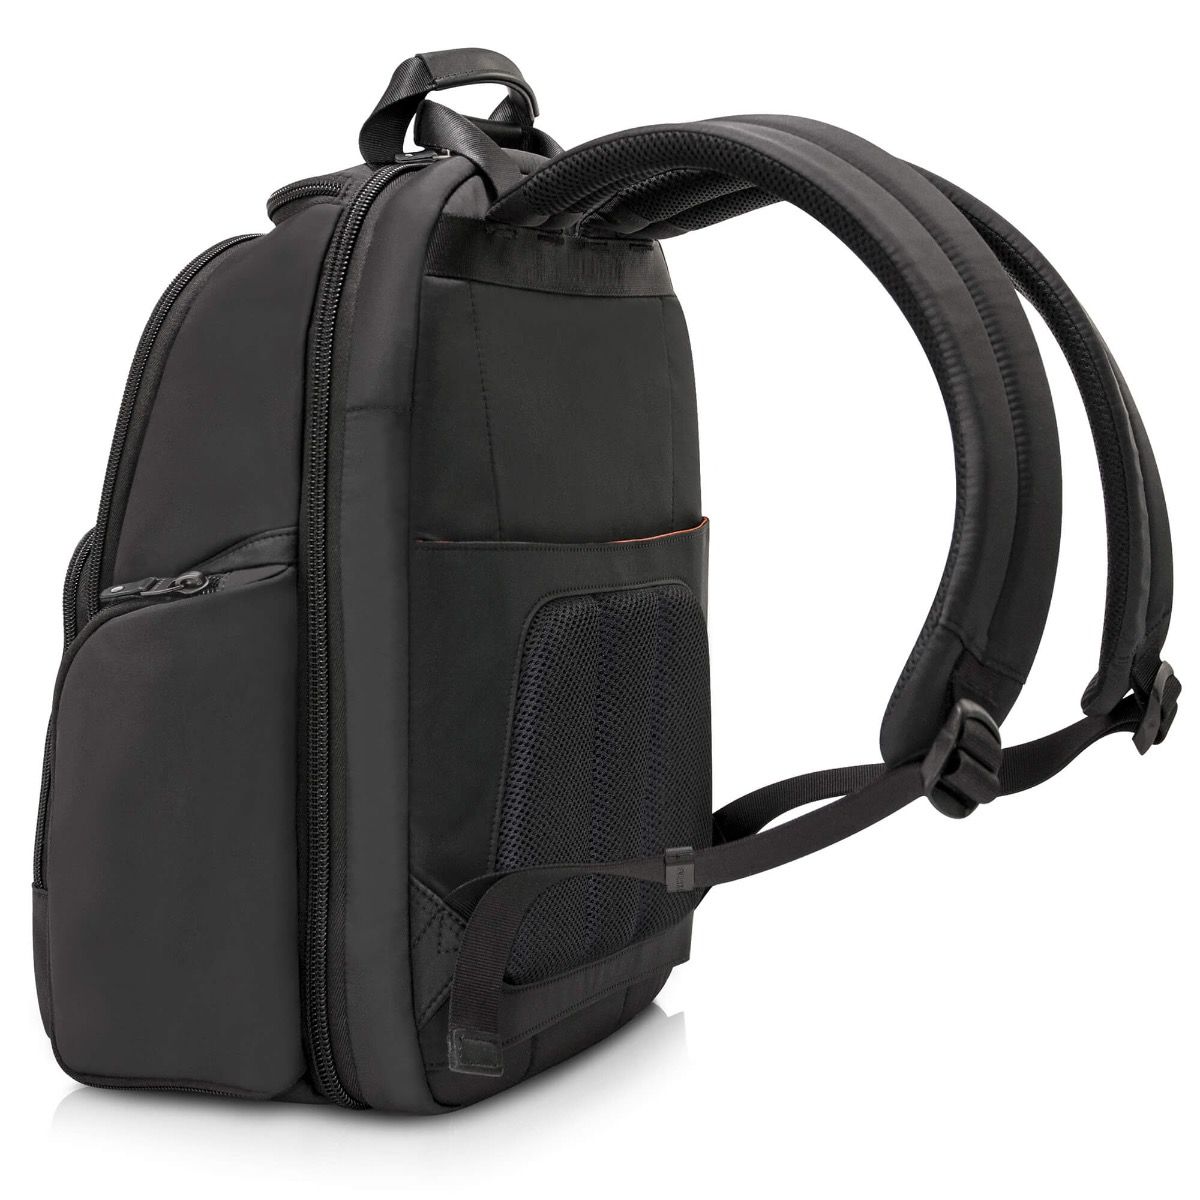 14 inch laptop backpack travel